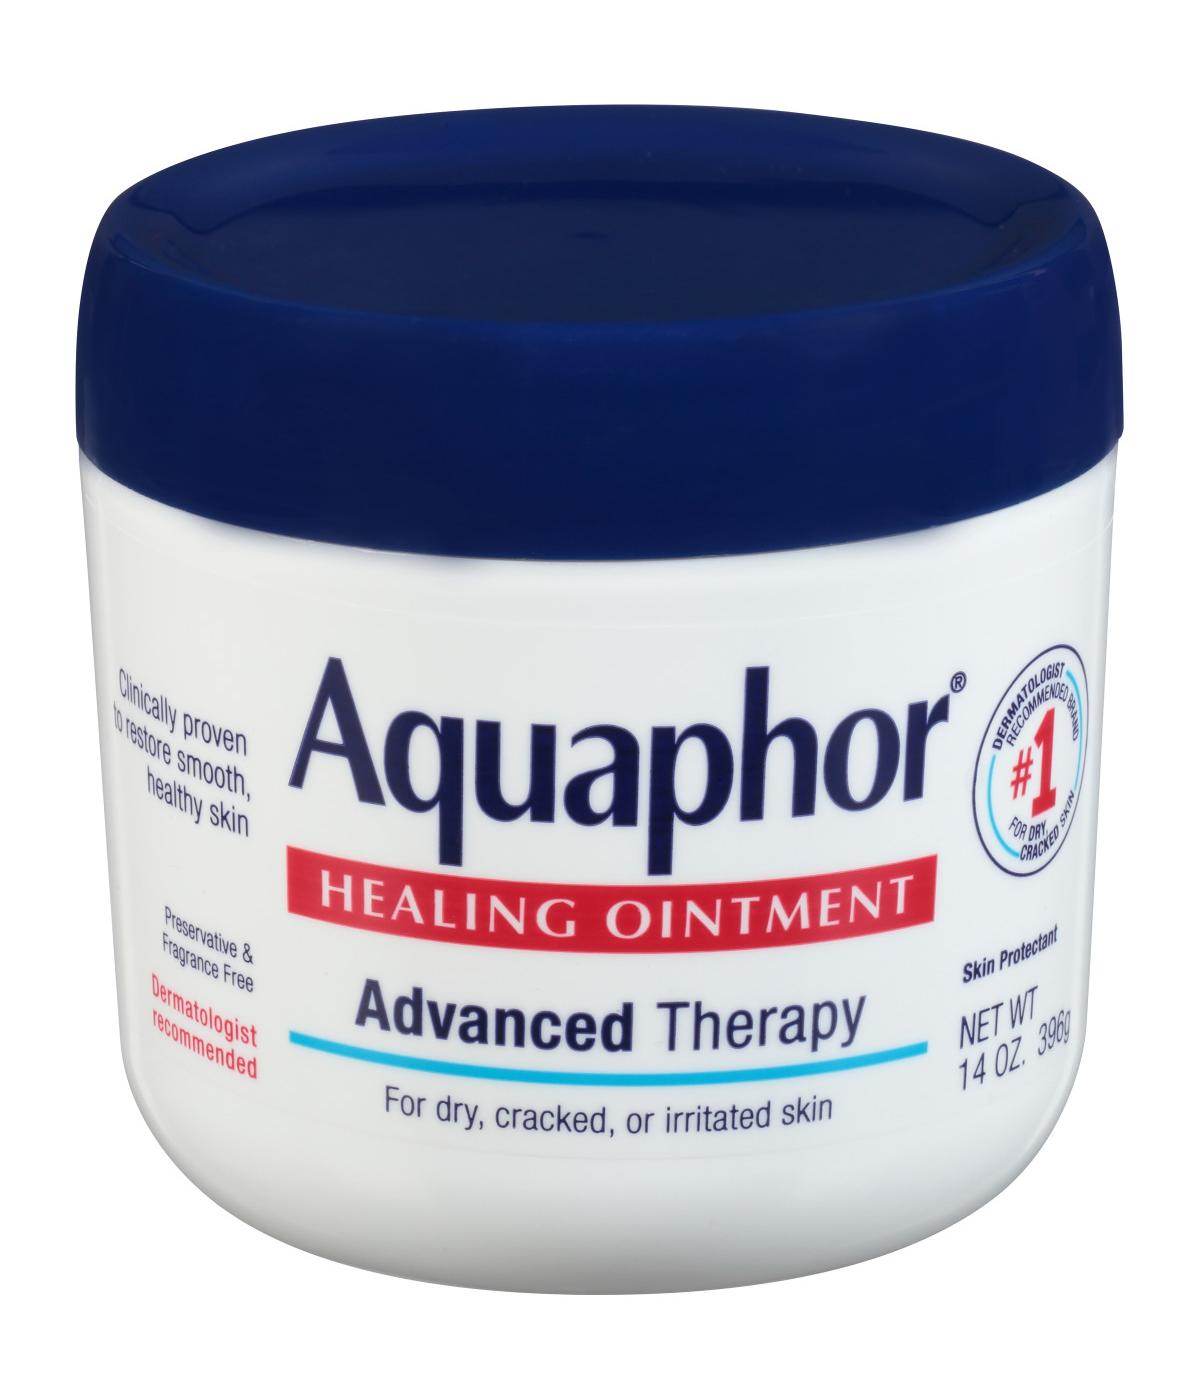 Aquaphor Advanced Therapy Healing Ointment Skin Protectant Jar; image 1 of 3